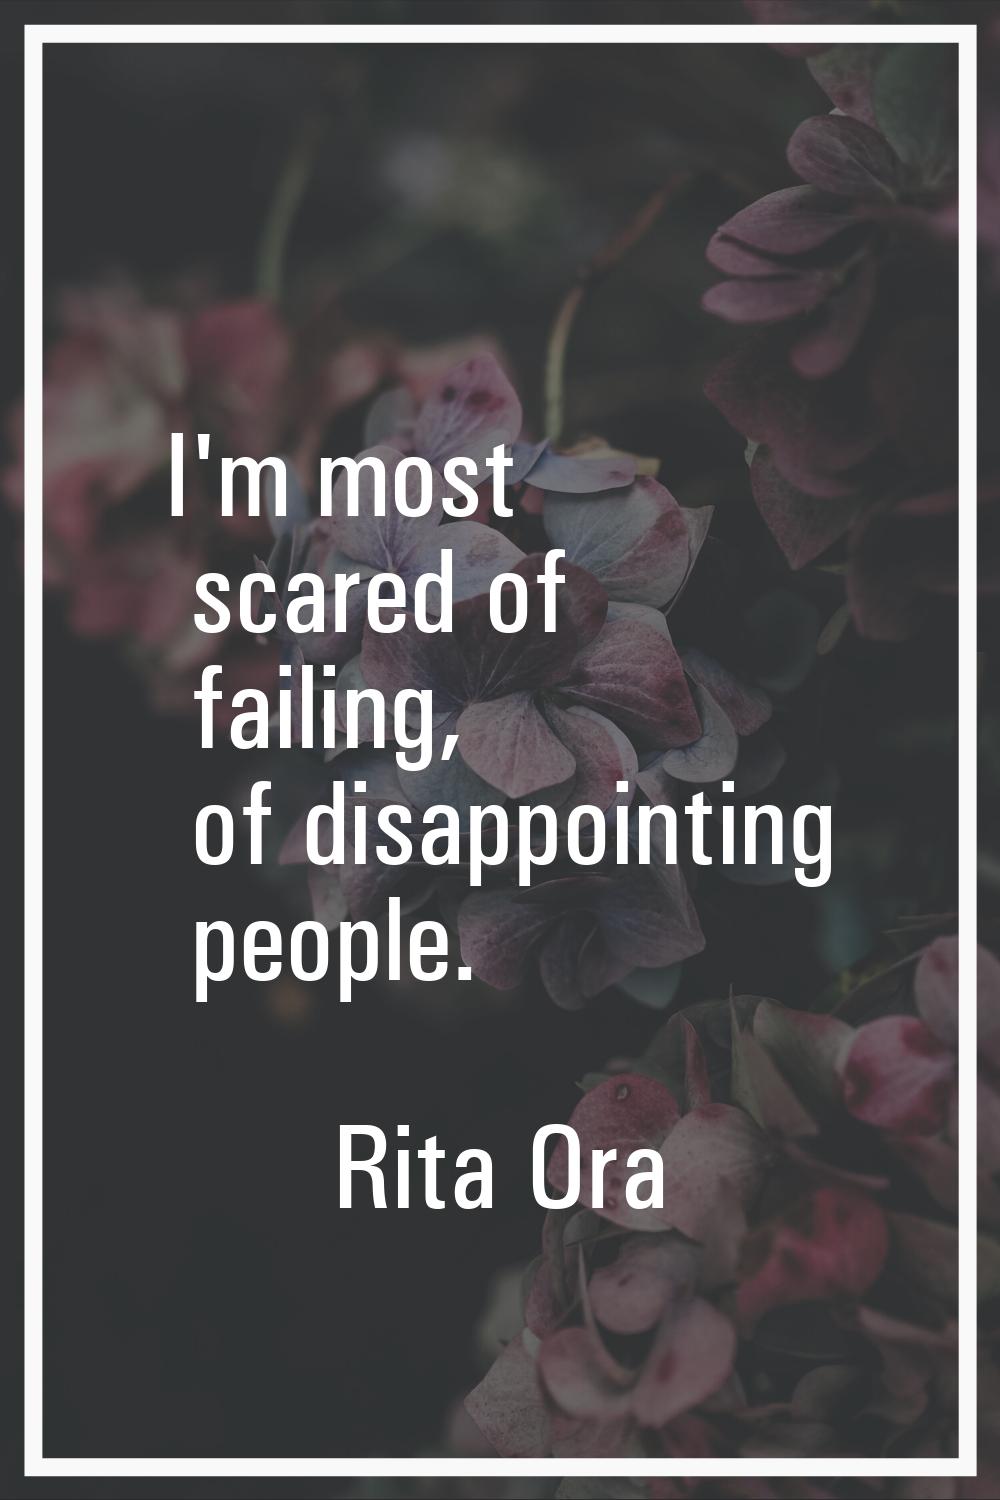 I'm most scared of failing, of disappointing people.